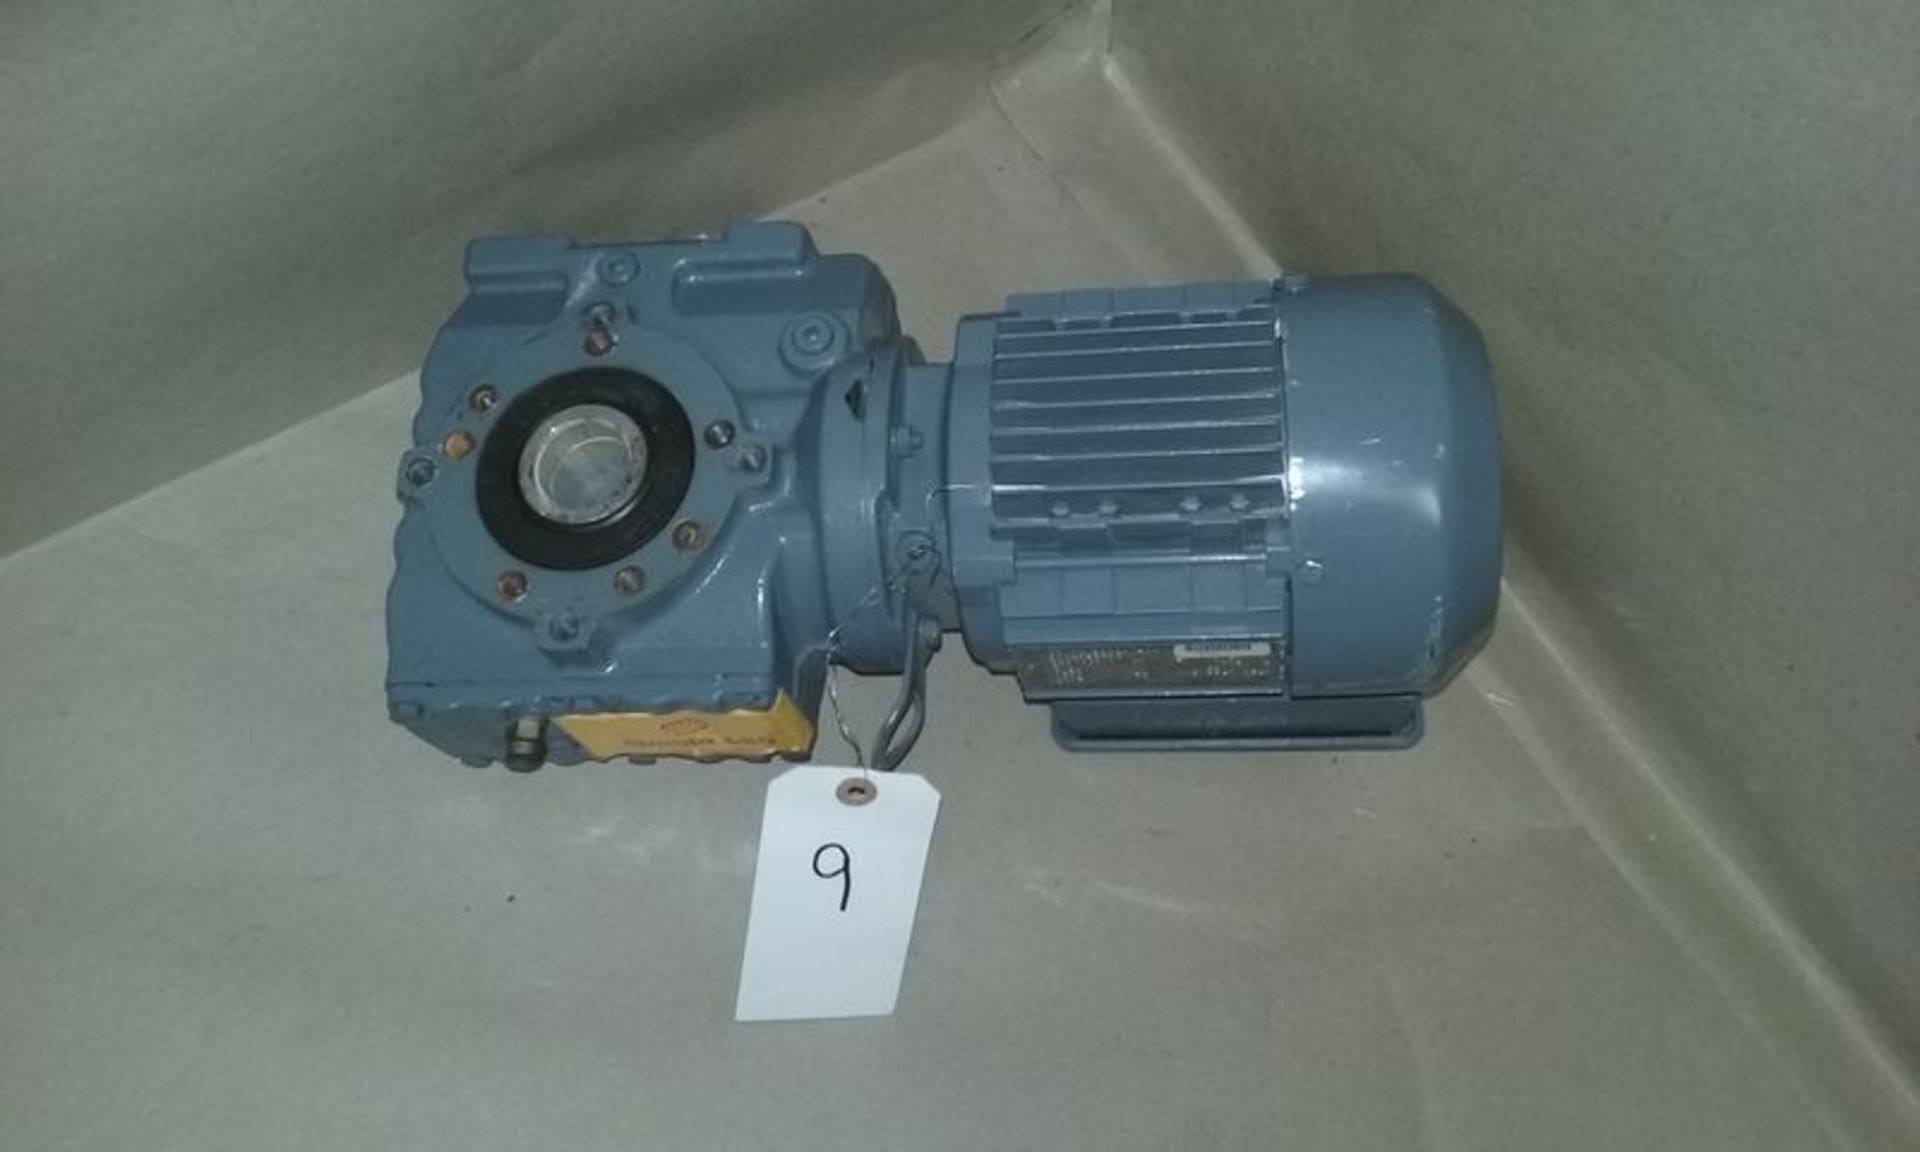 SEW EURODRIVE 1/2 HP WITH RIGHT ANGLE GEAR DRIVE - Image 4 of 4